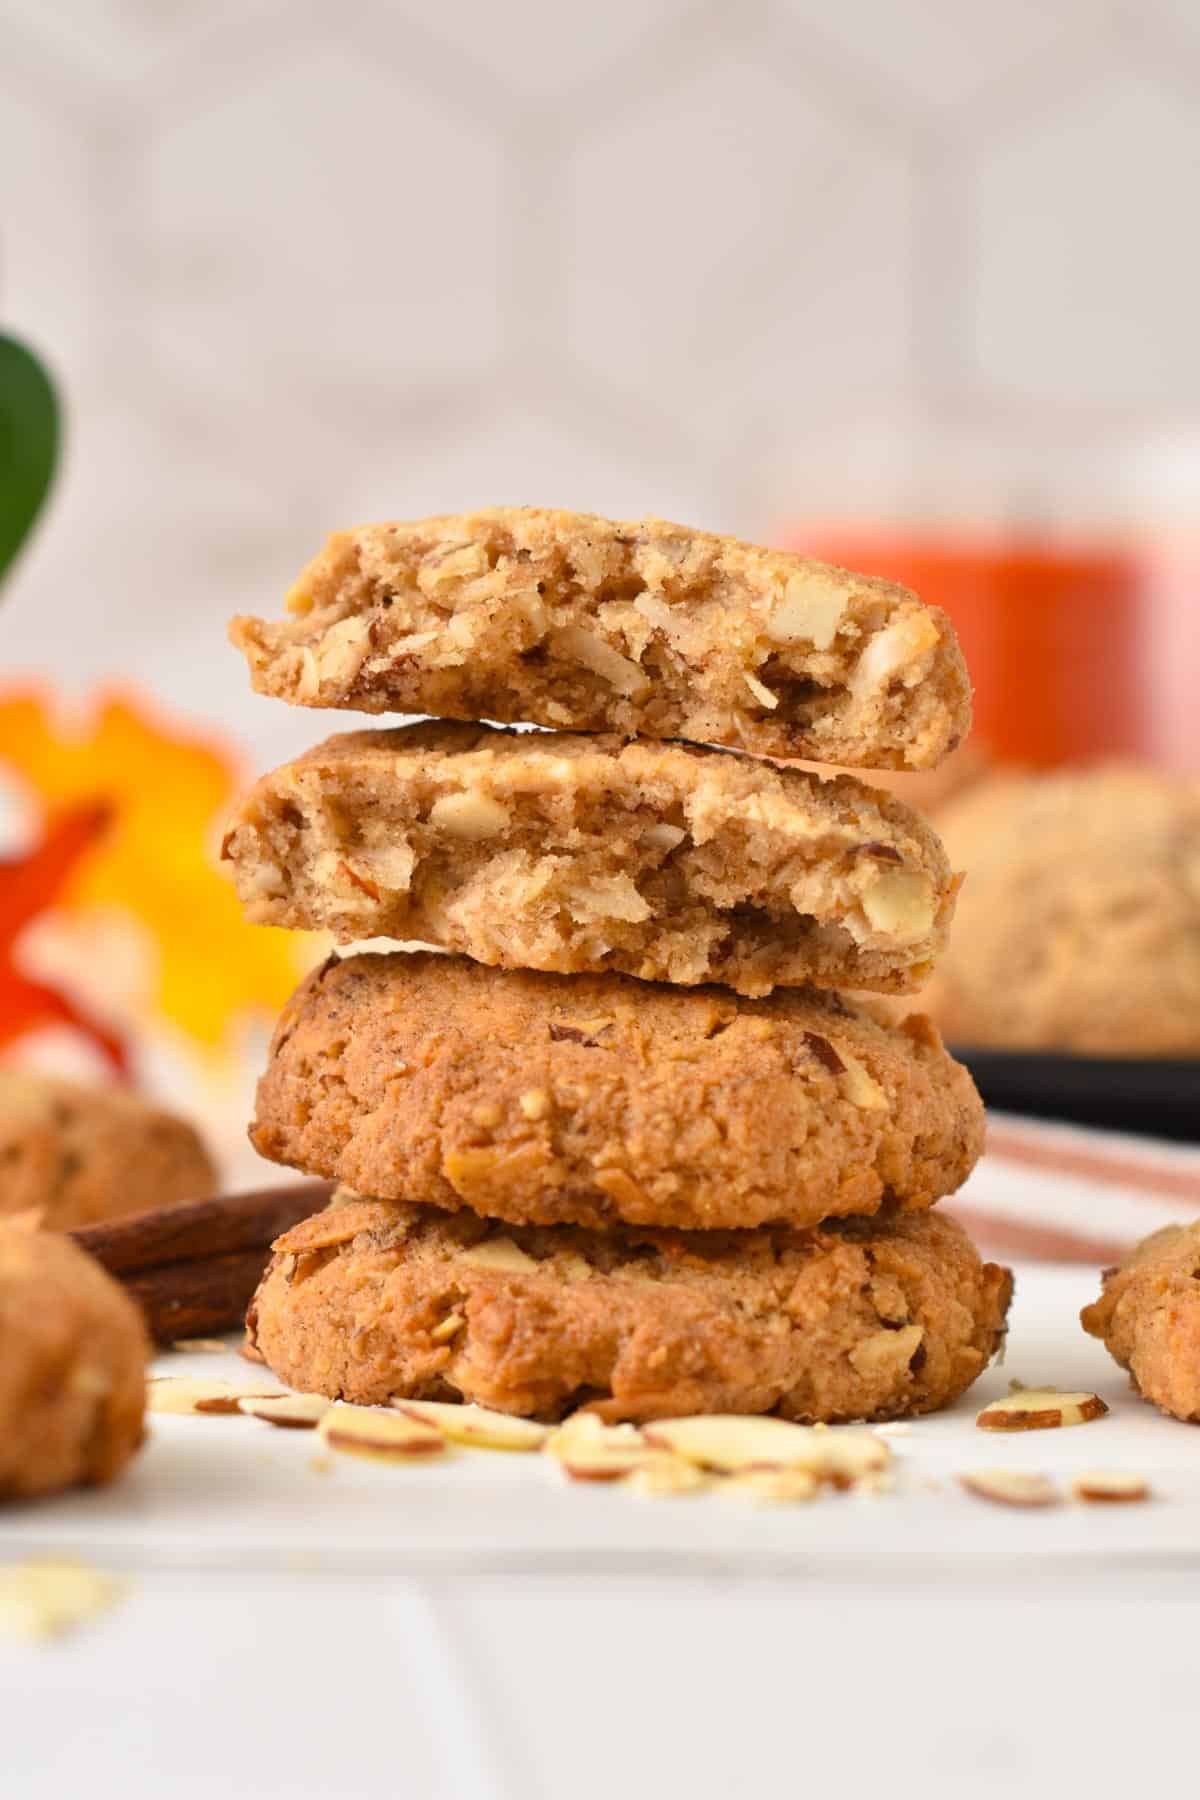 A stack of keto oatmeal cookies with one cookie broken in half showing the soft, chewy texture inside the cookie.